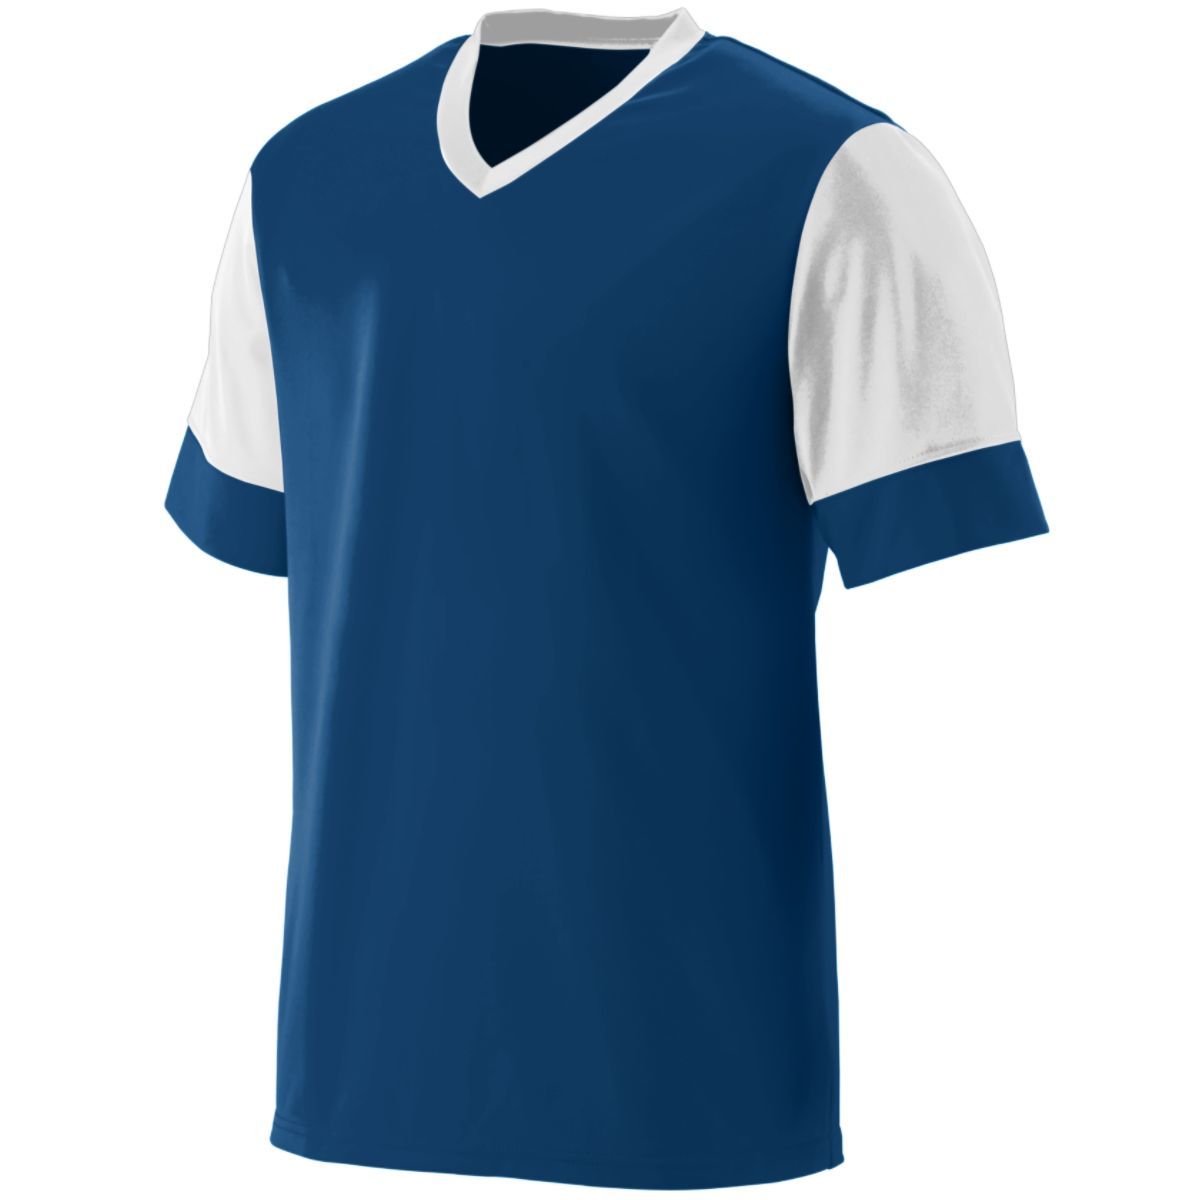 Augusta Sportswear Youth Lightning Jersey in Navy/White  -Part of the Youth, Youth-Jersey, Augusta-Products, Soccer, Shirts, All-Sports-1 product lines at KanaleyCreations.com